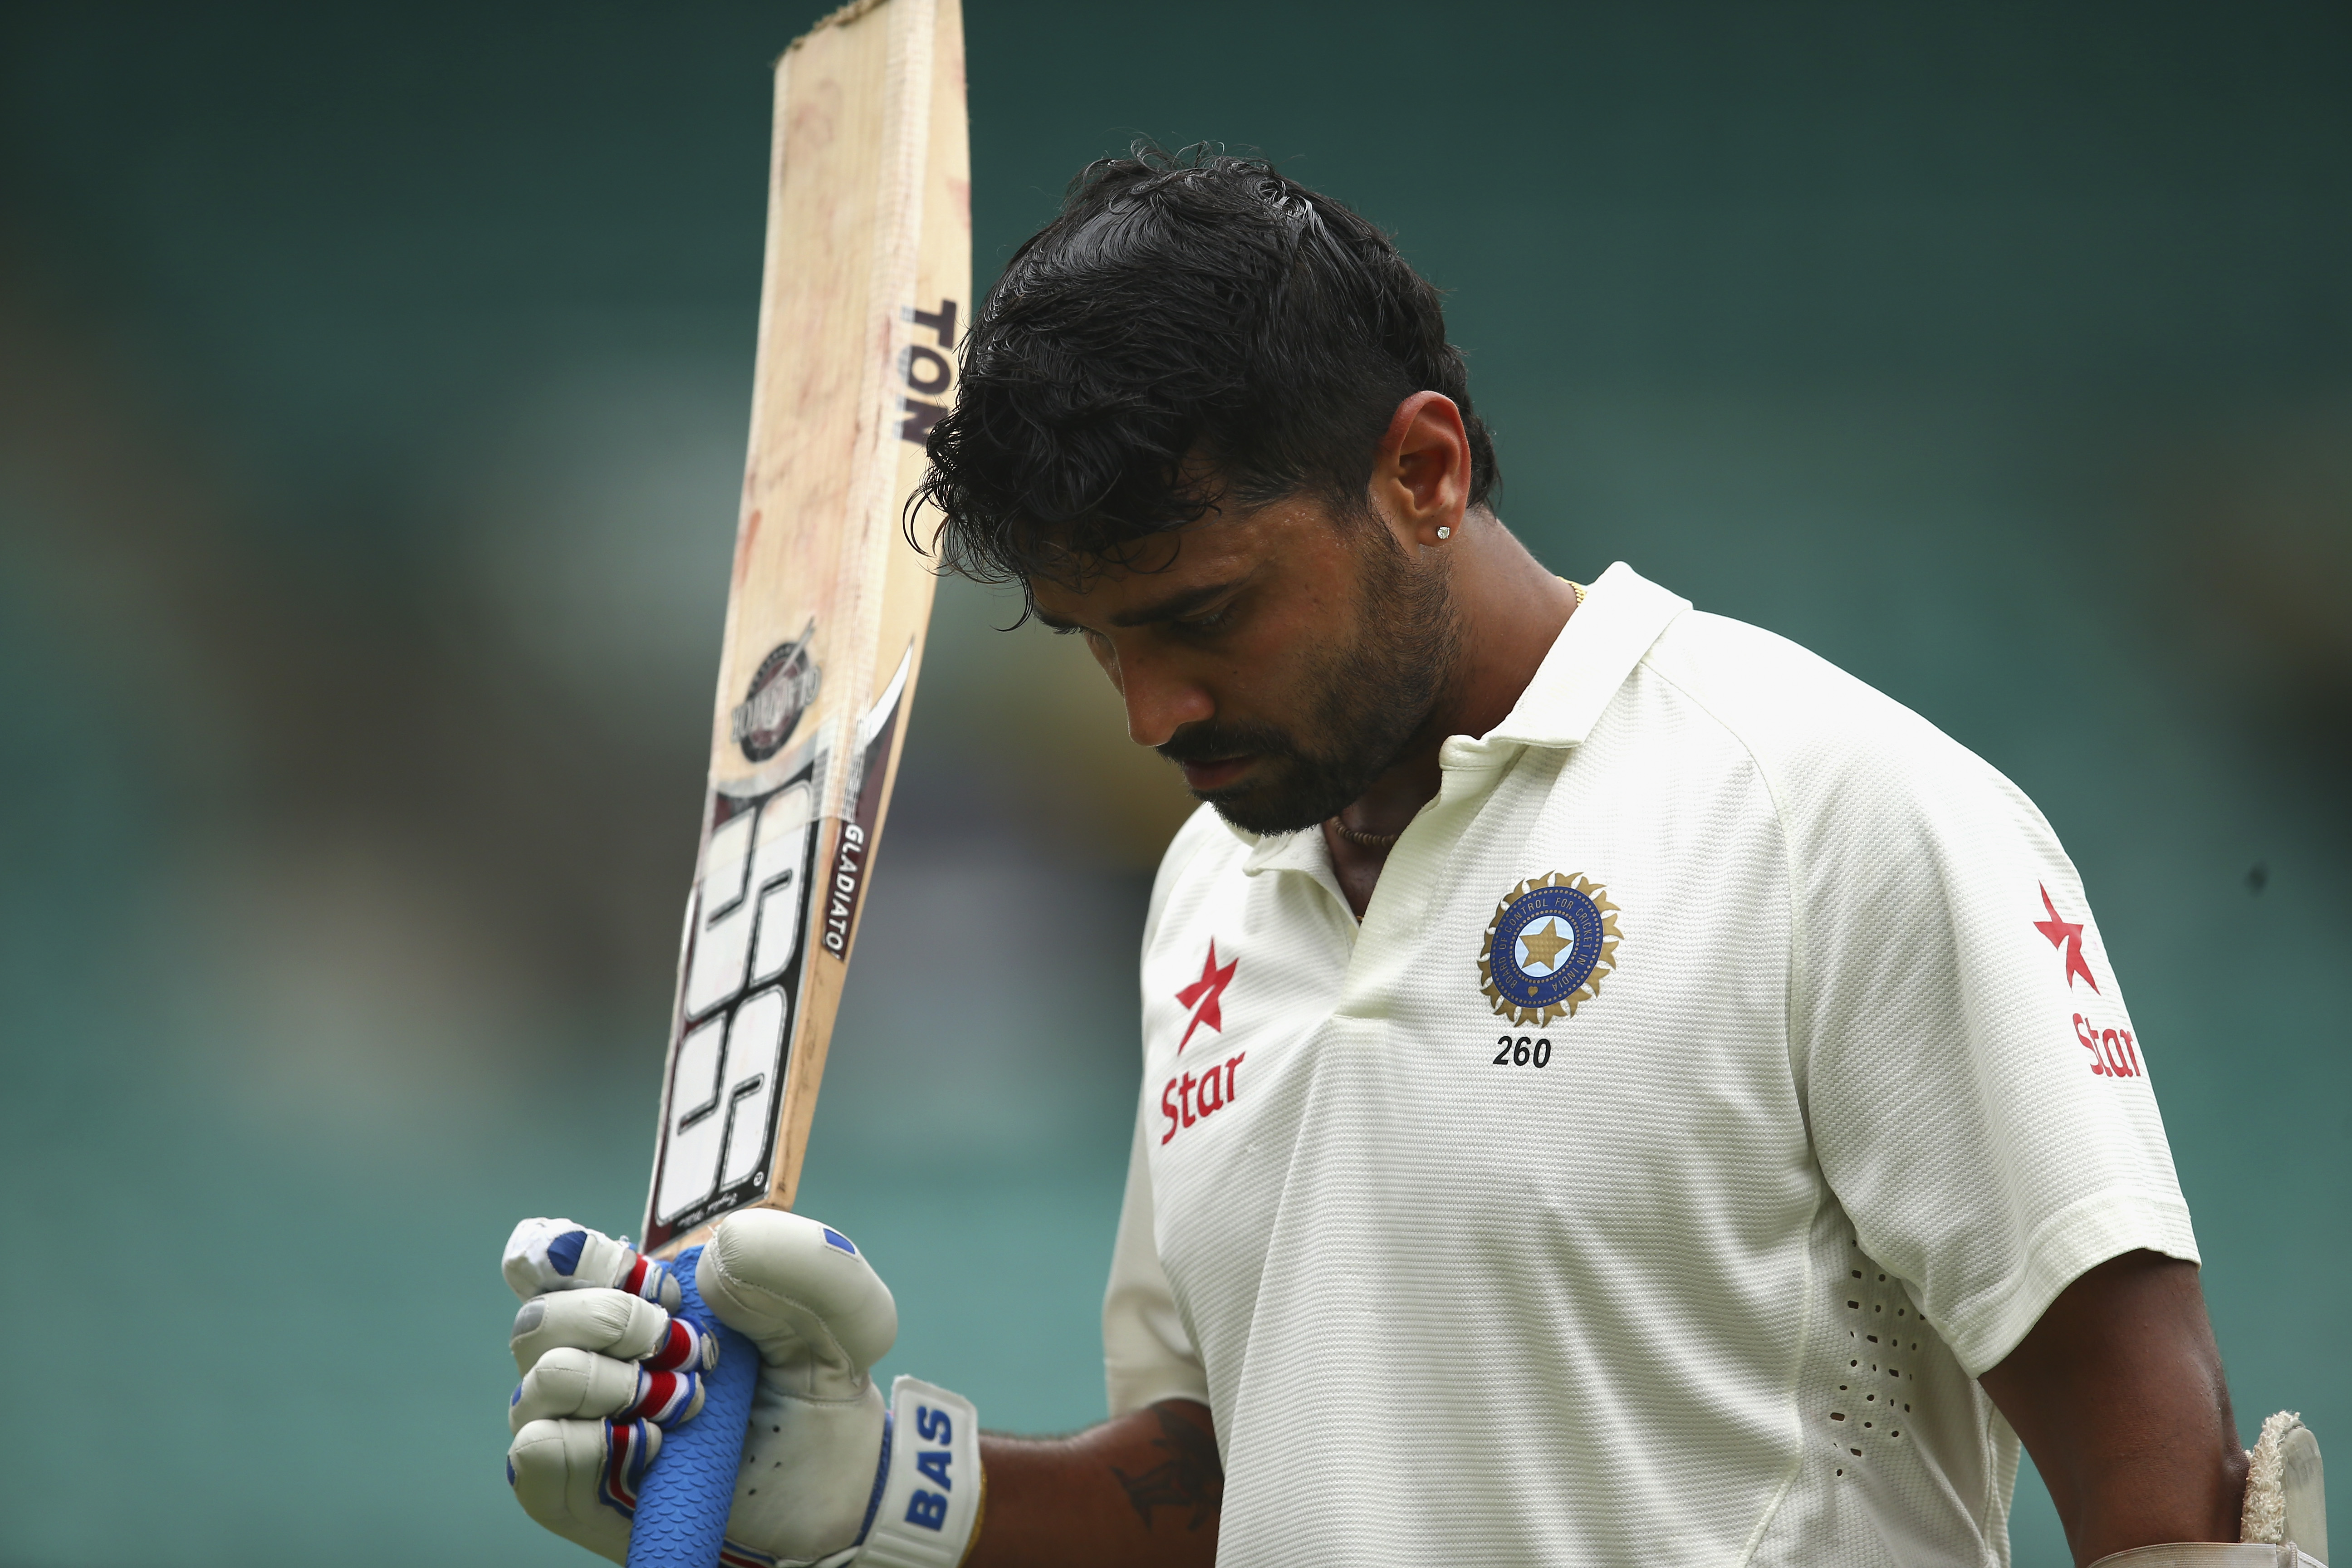 Constant shuffling in and out of the team plays on players’ minds, says Murali Vijay